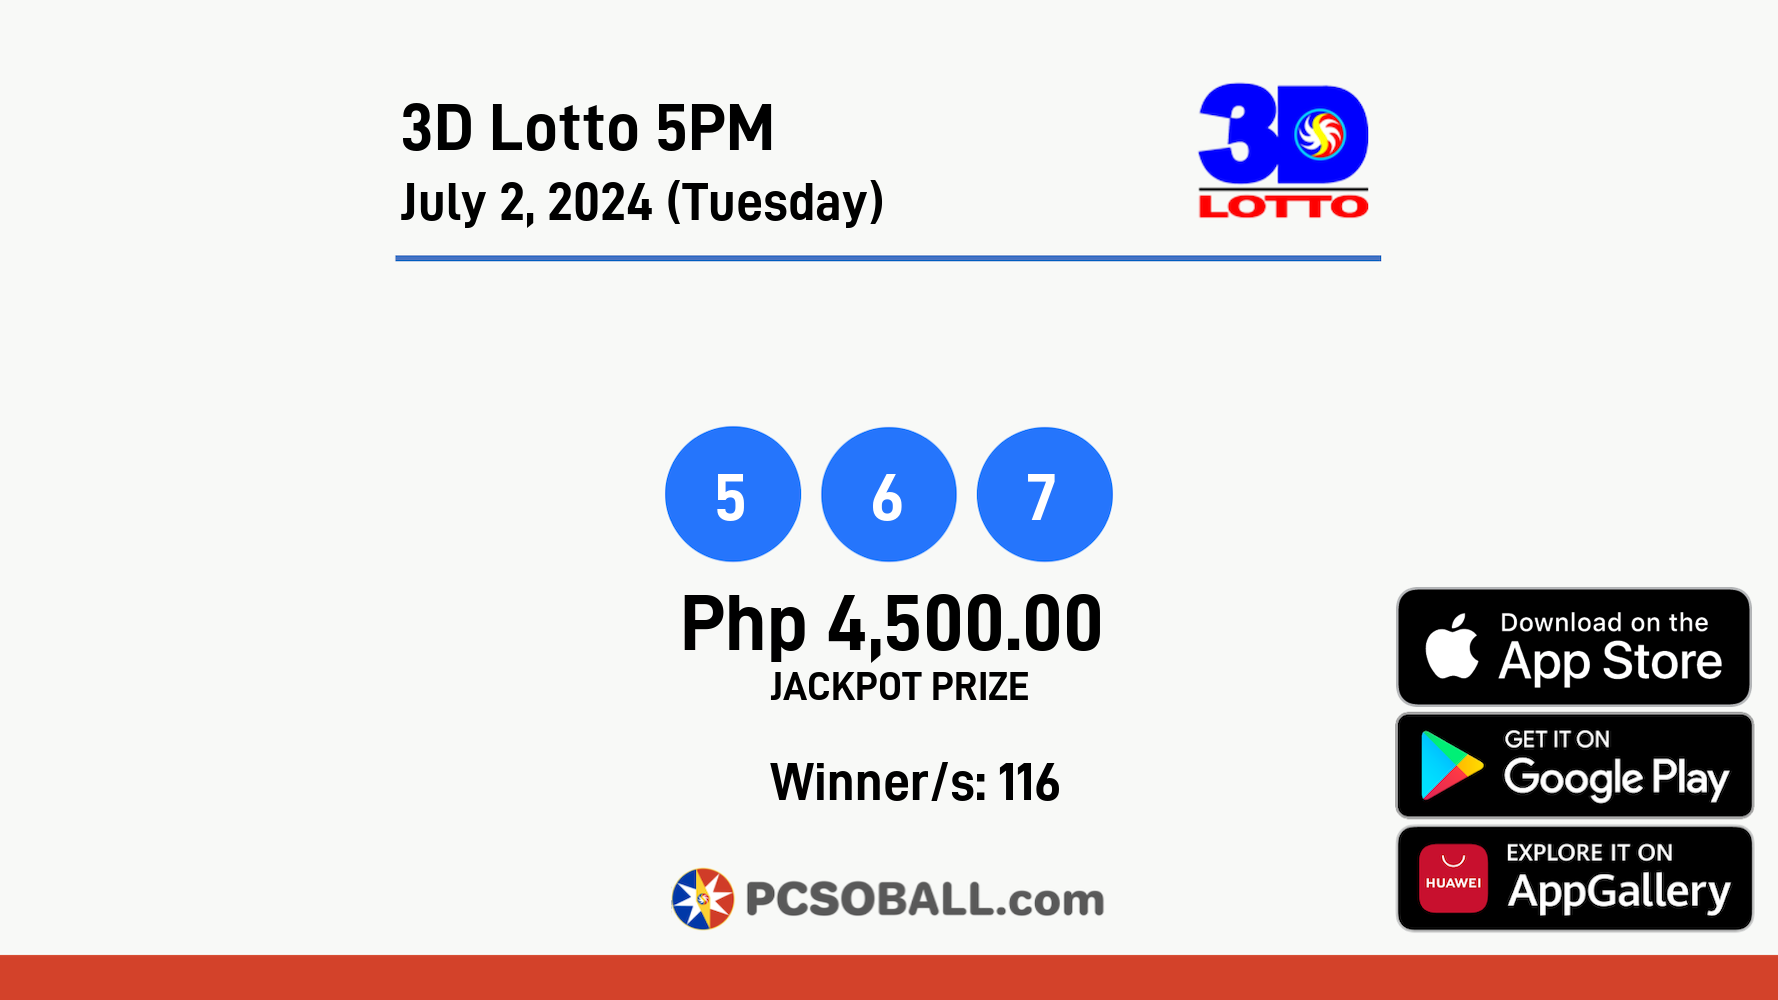 3D Lotto 5PM July 2, 2024 (Tuesday) Result